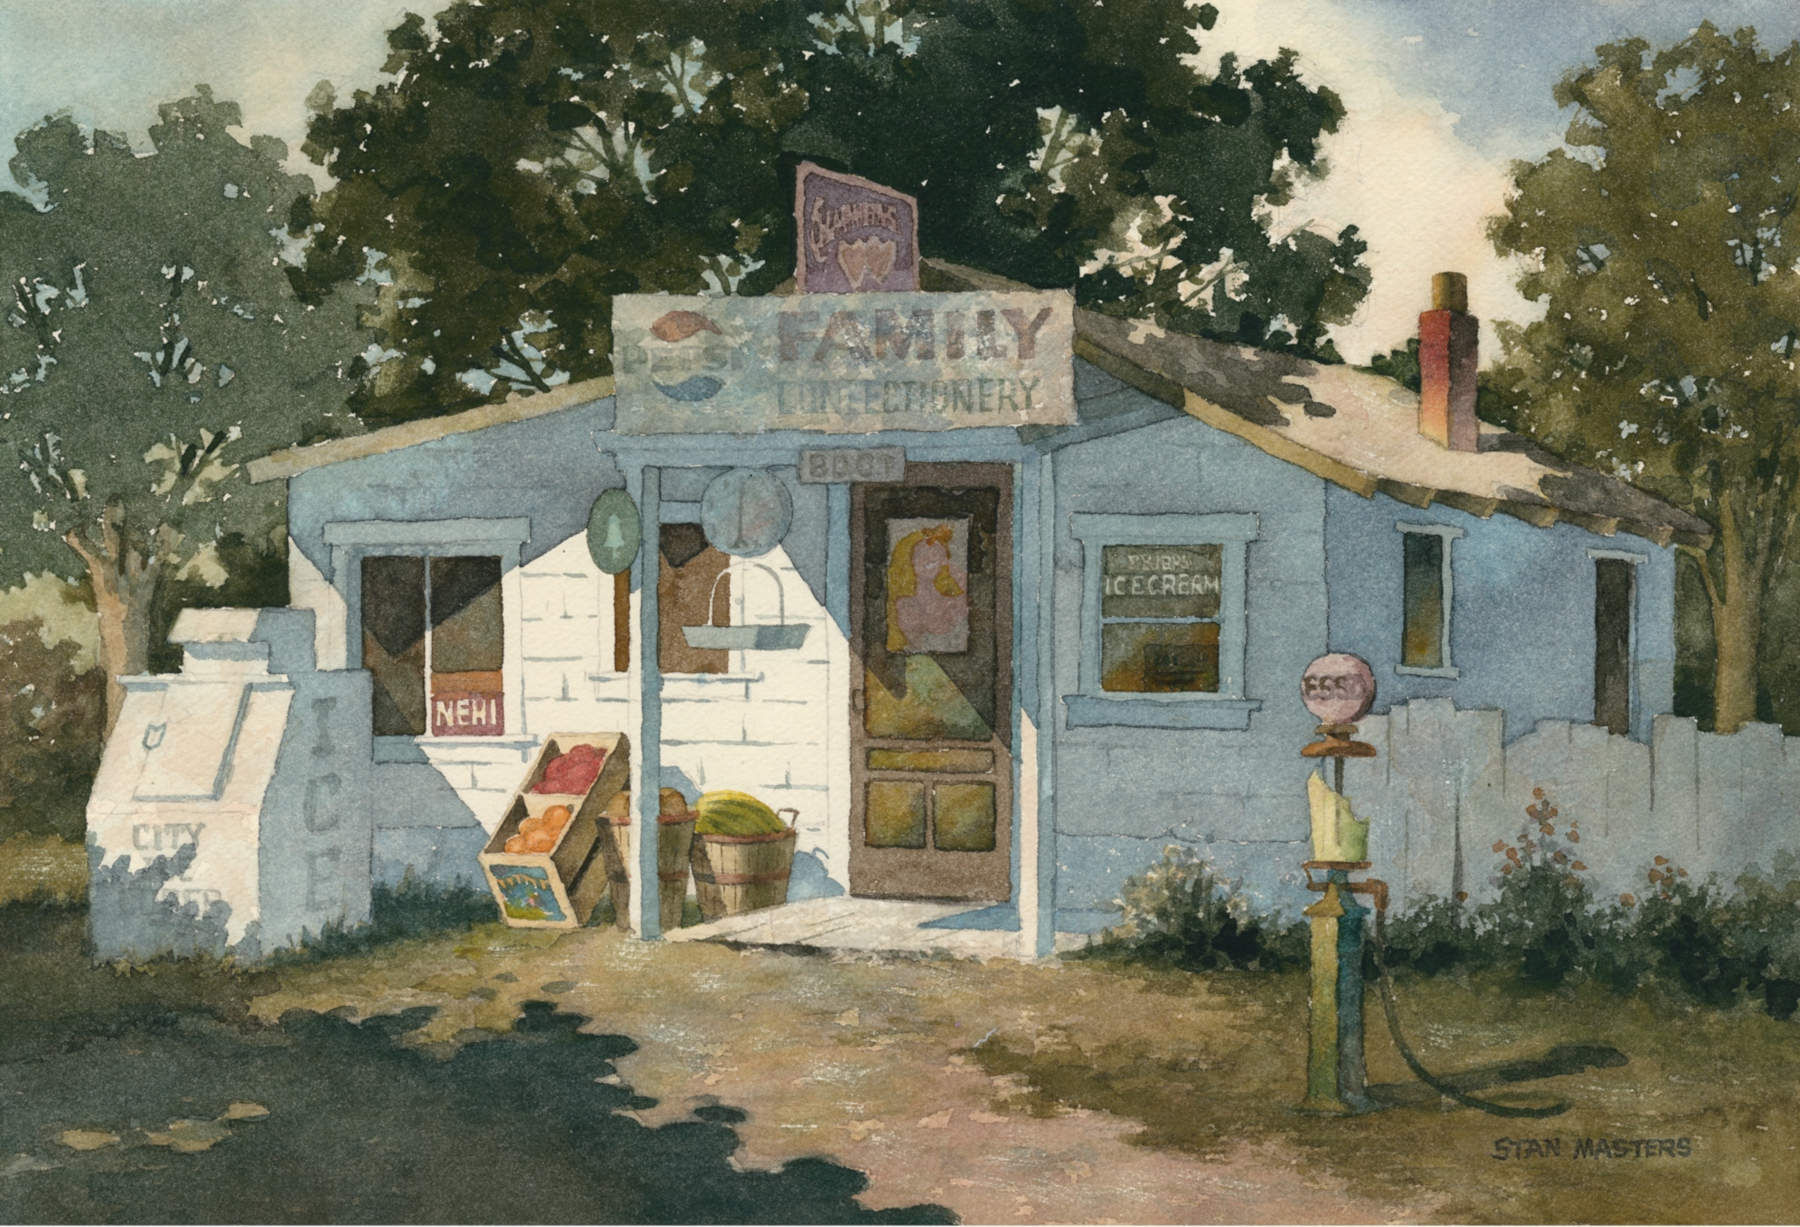 Stan Masters (1922-2005) "Family Confectionery" 12" x 18"